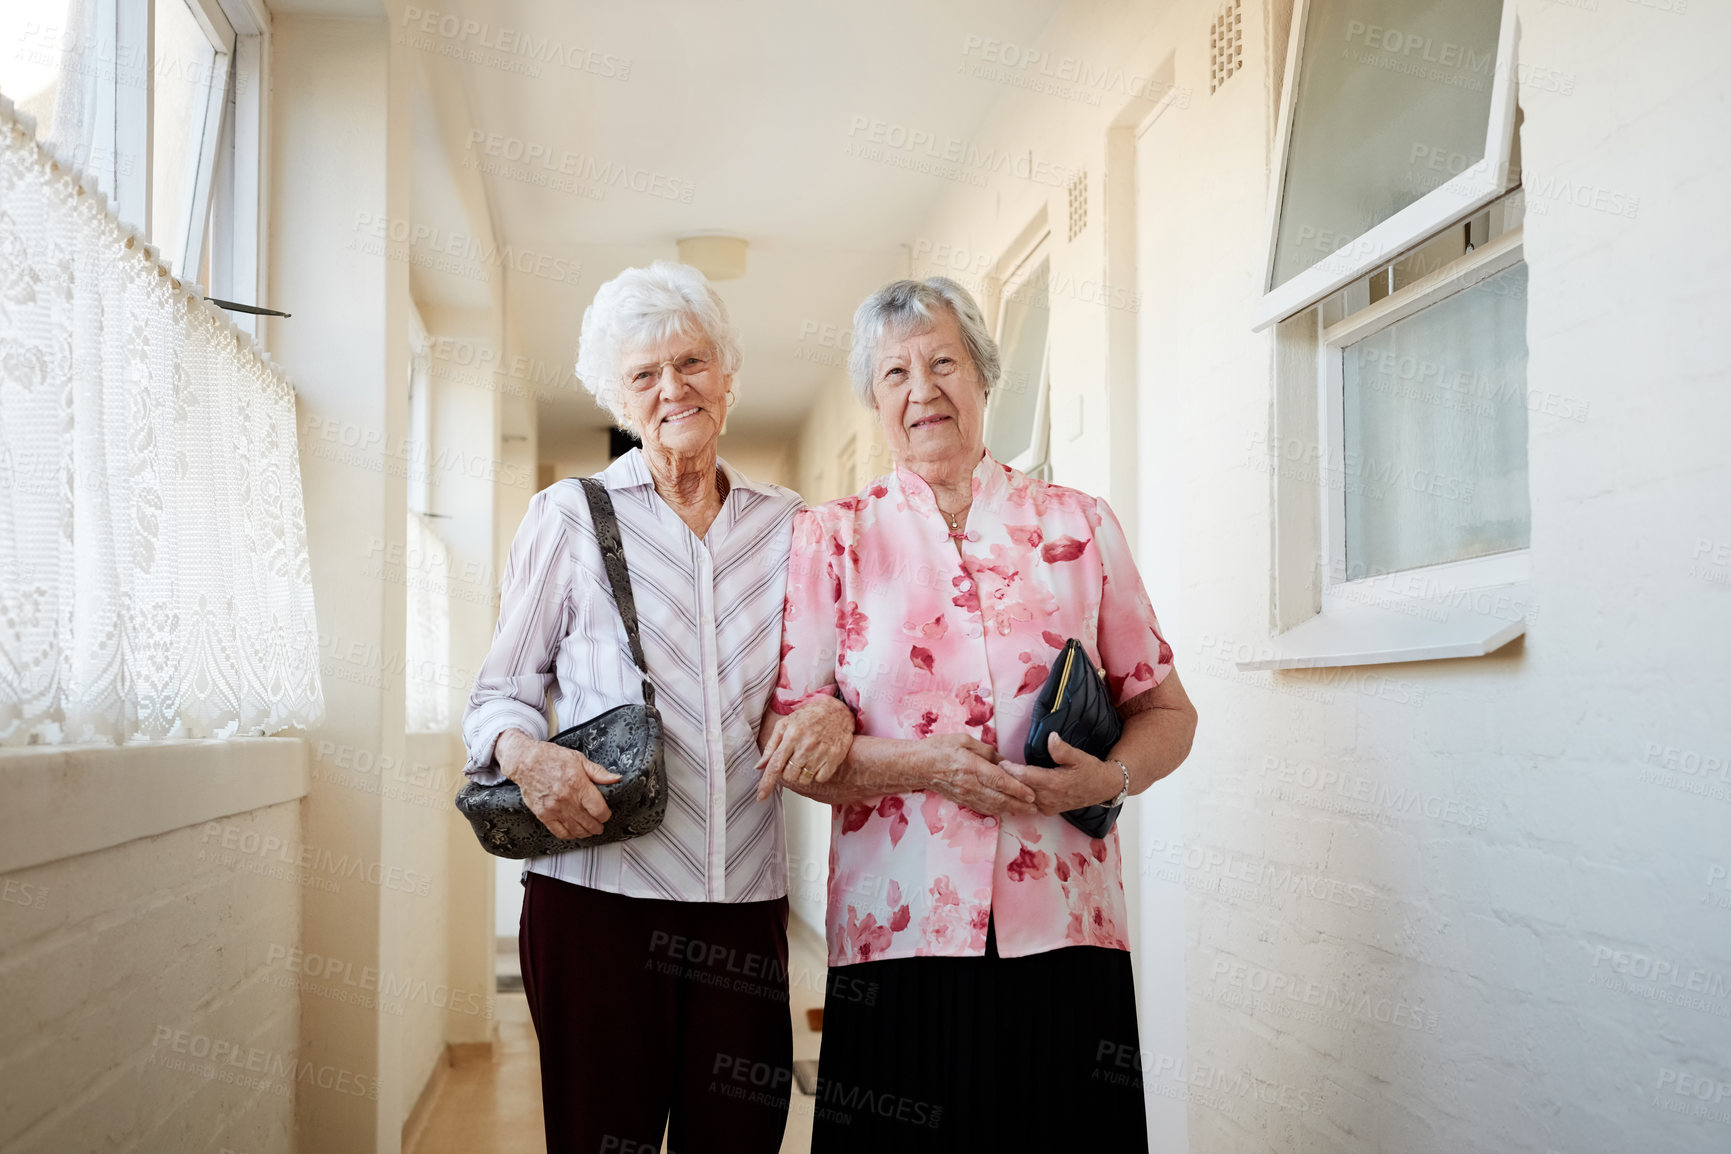 Buy stock photo Portrait of two happy elderly women carrying their bags and getting ready to go out